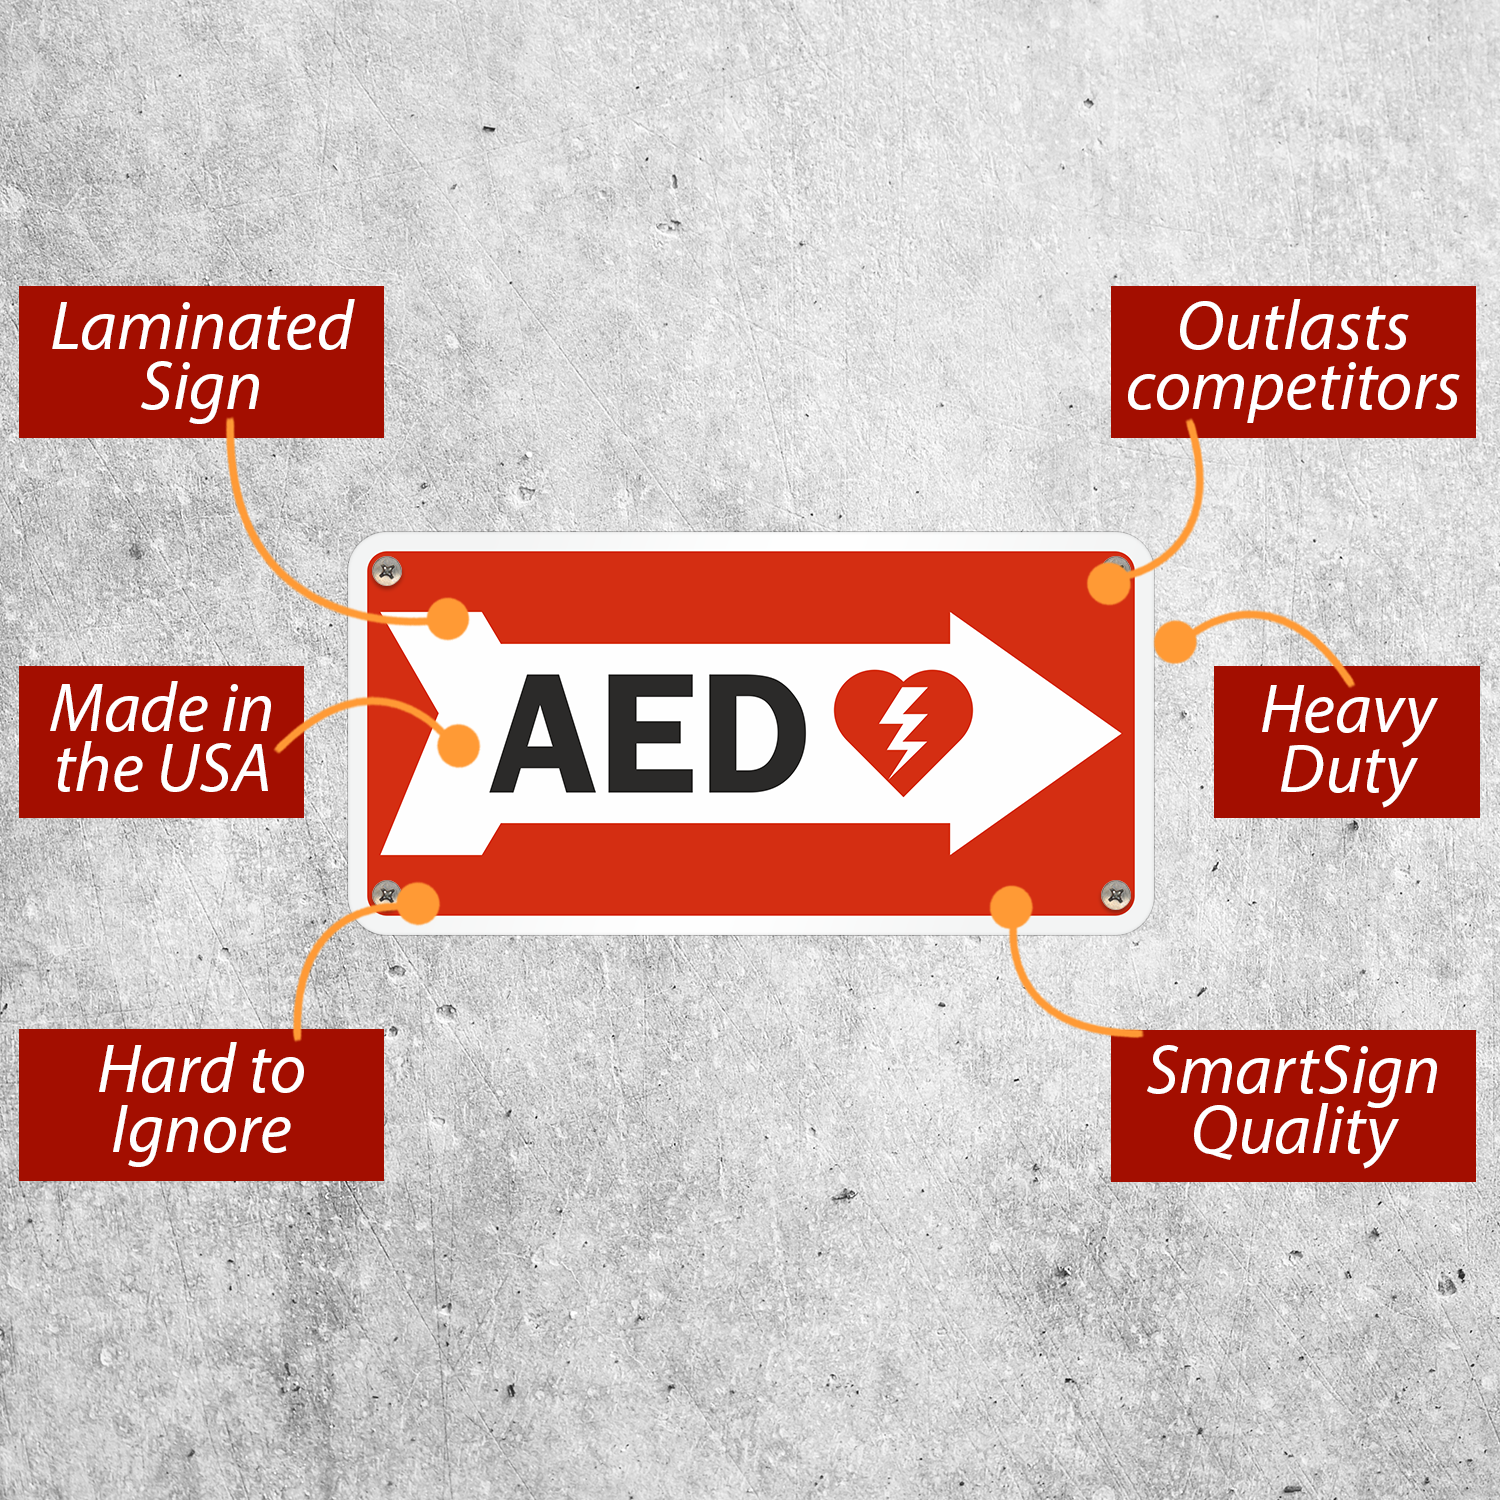 Right arrow label for AED location